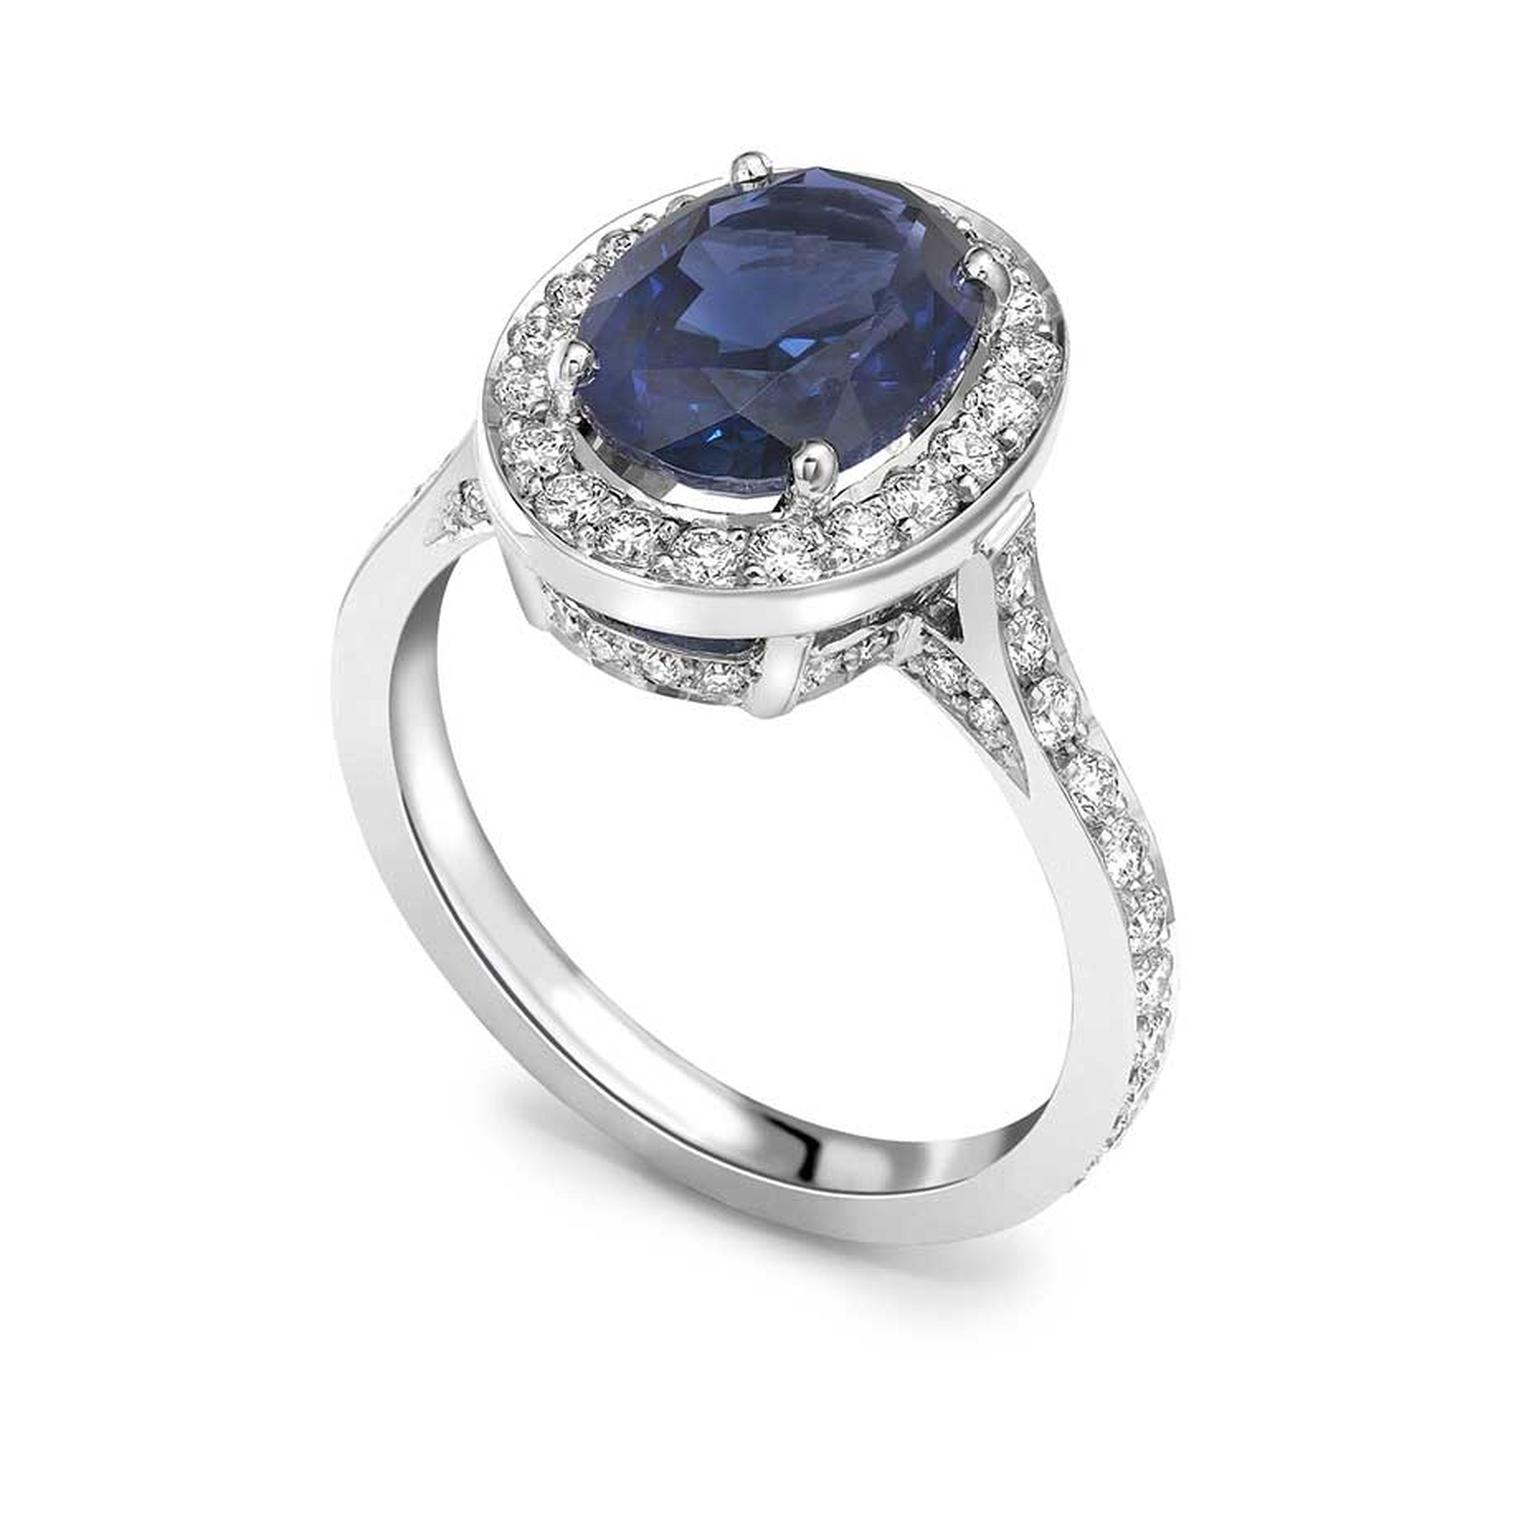 Theo Fennell sapphire engagement ring in white gold, set with a 2.82ct natural oval sapphire and pavé diamonds (£9,250).